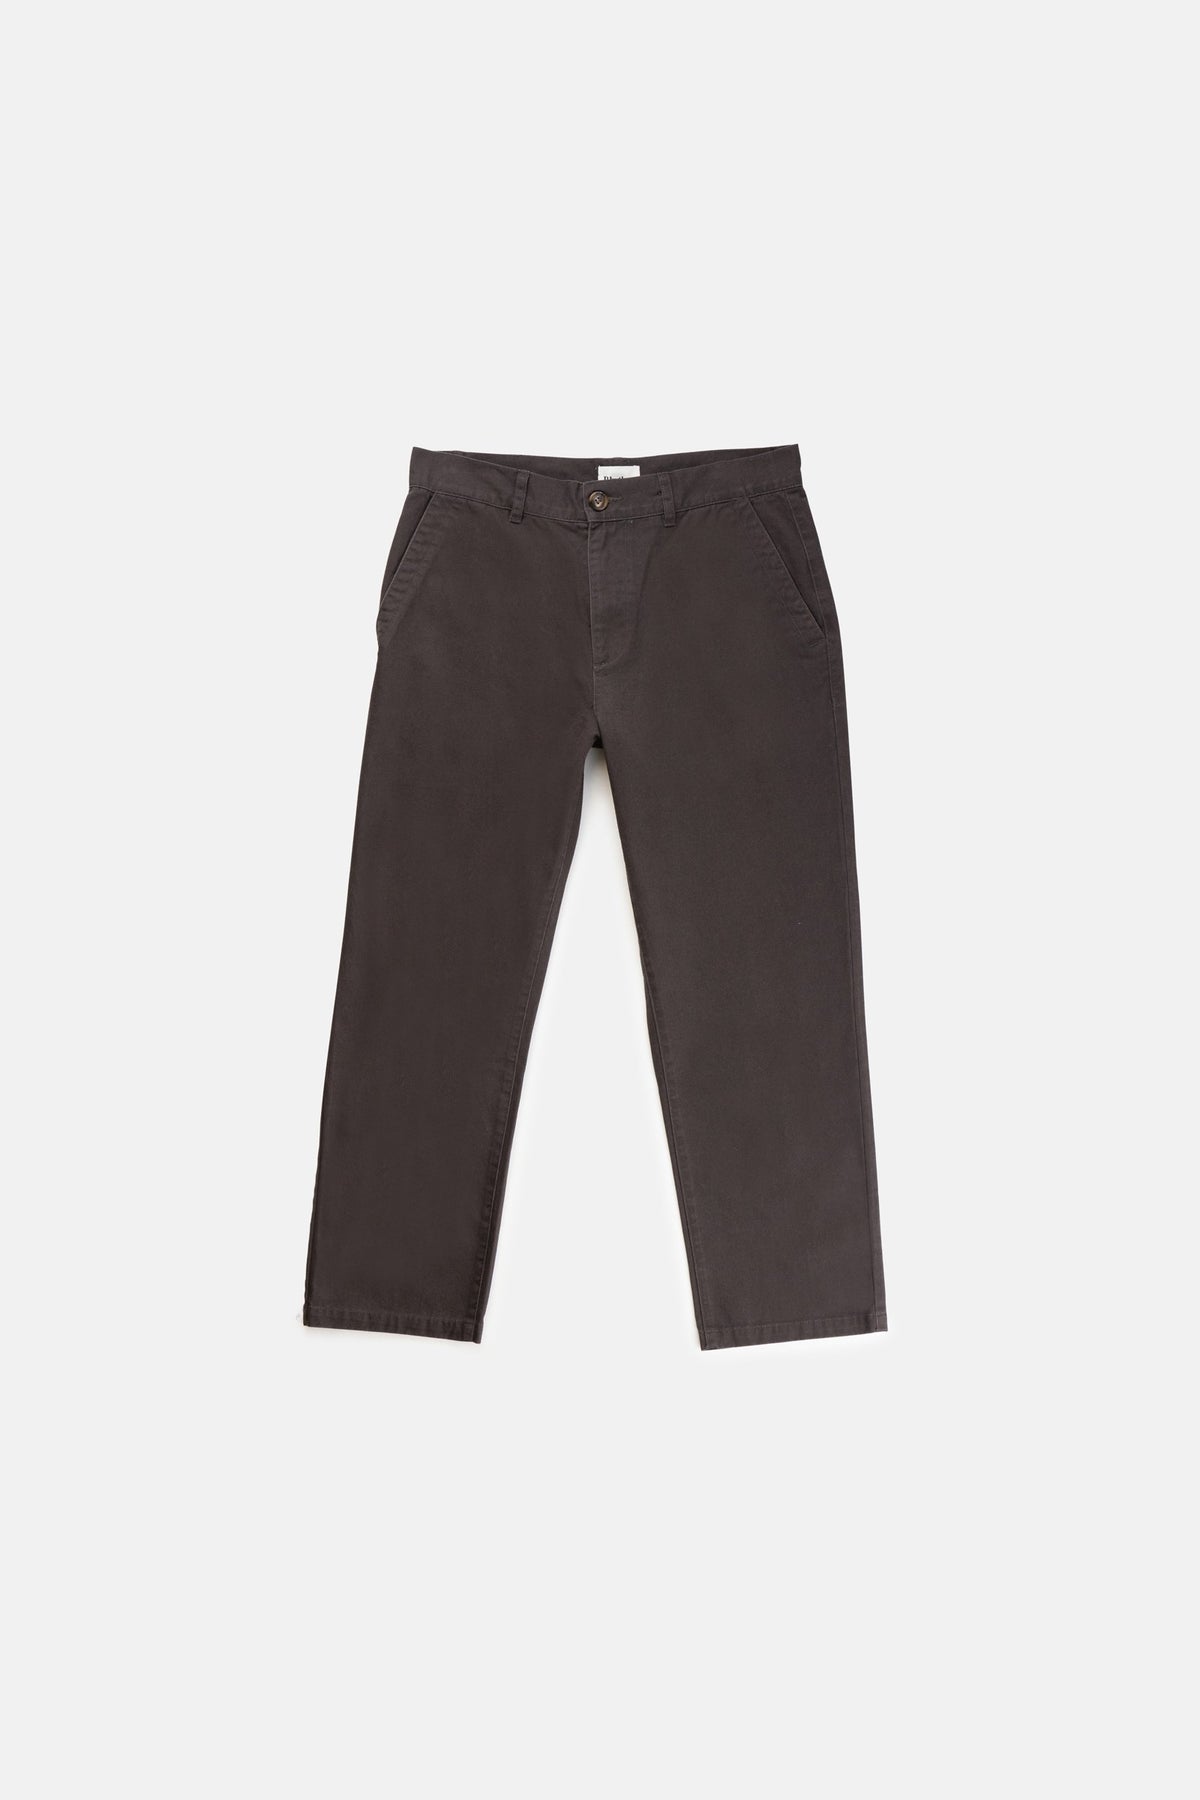 Essential Twill Trouser- Charcoal